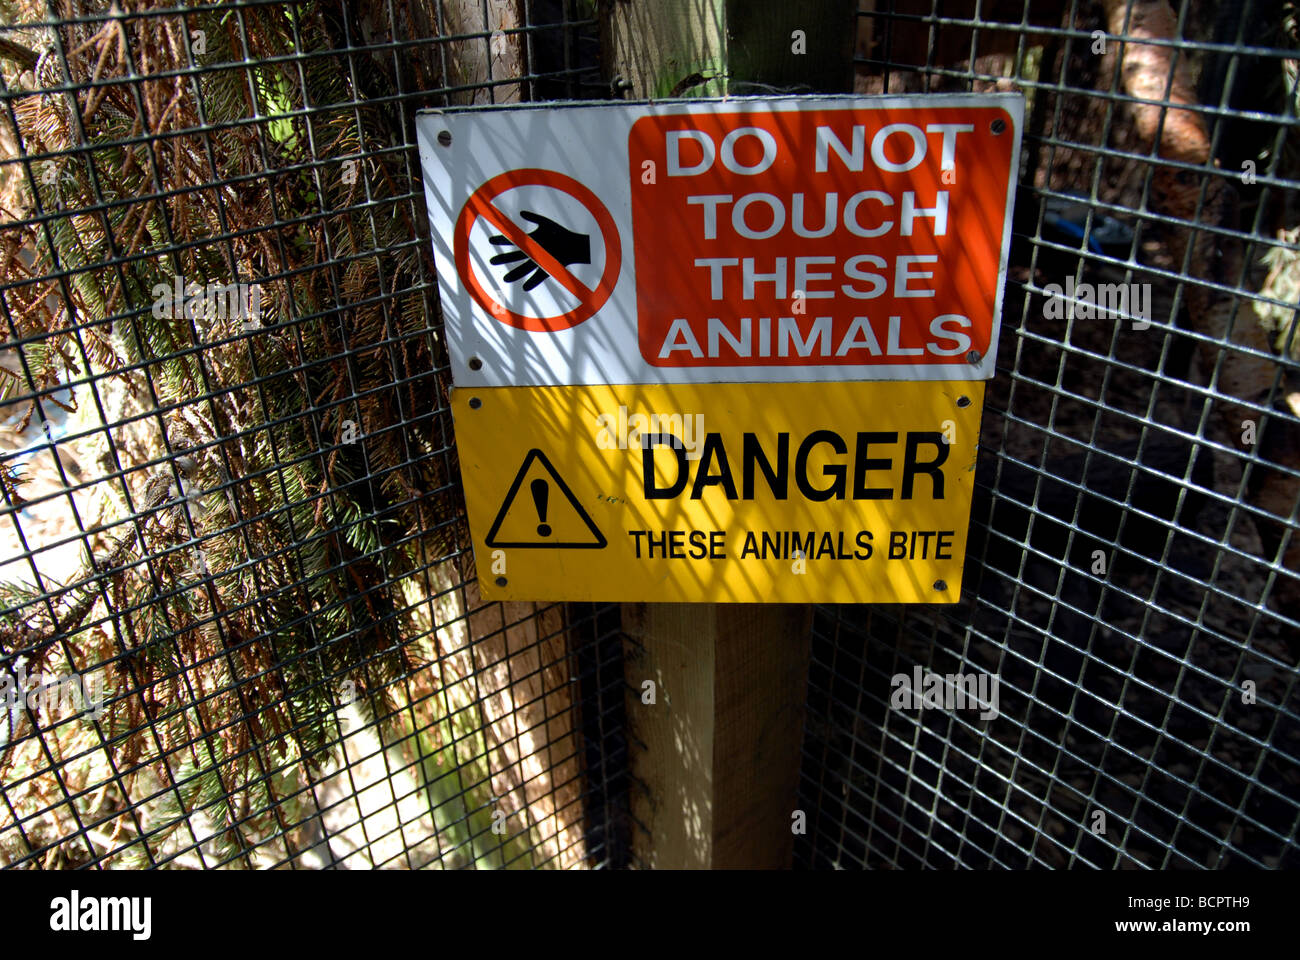 Danger DO NOT TOUCH animals sign Stock Photo